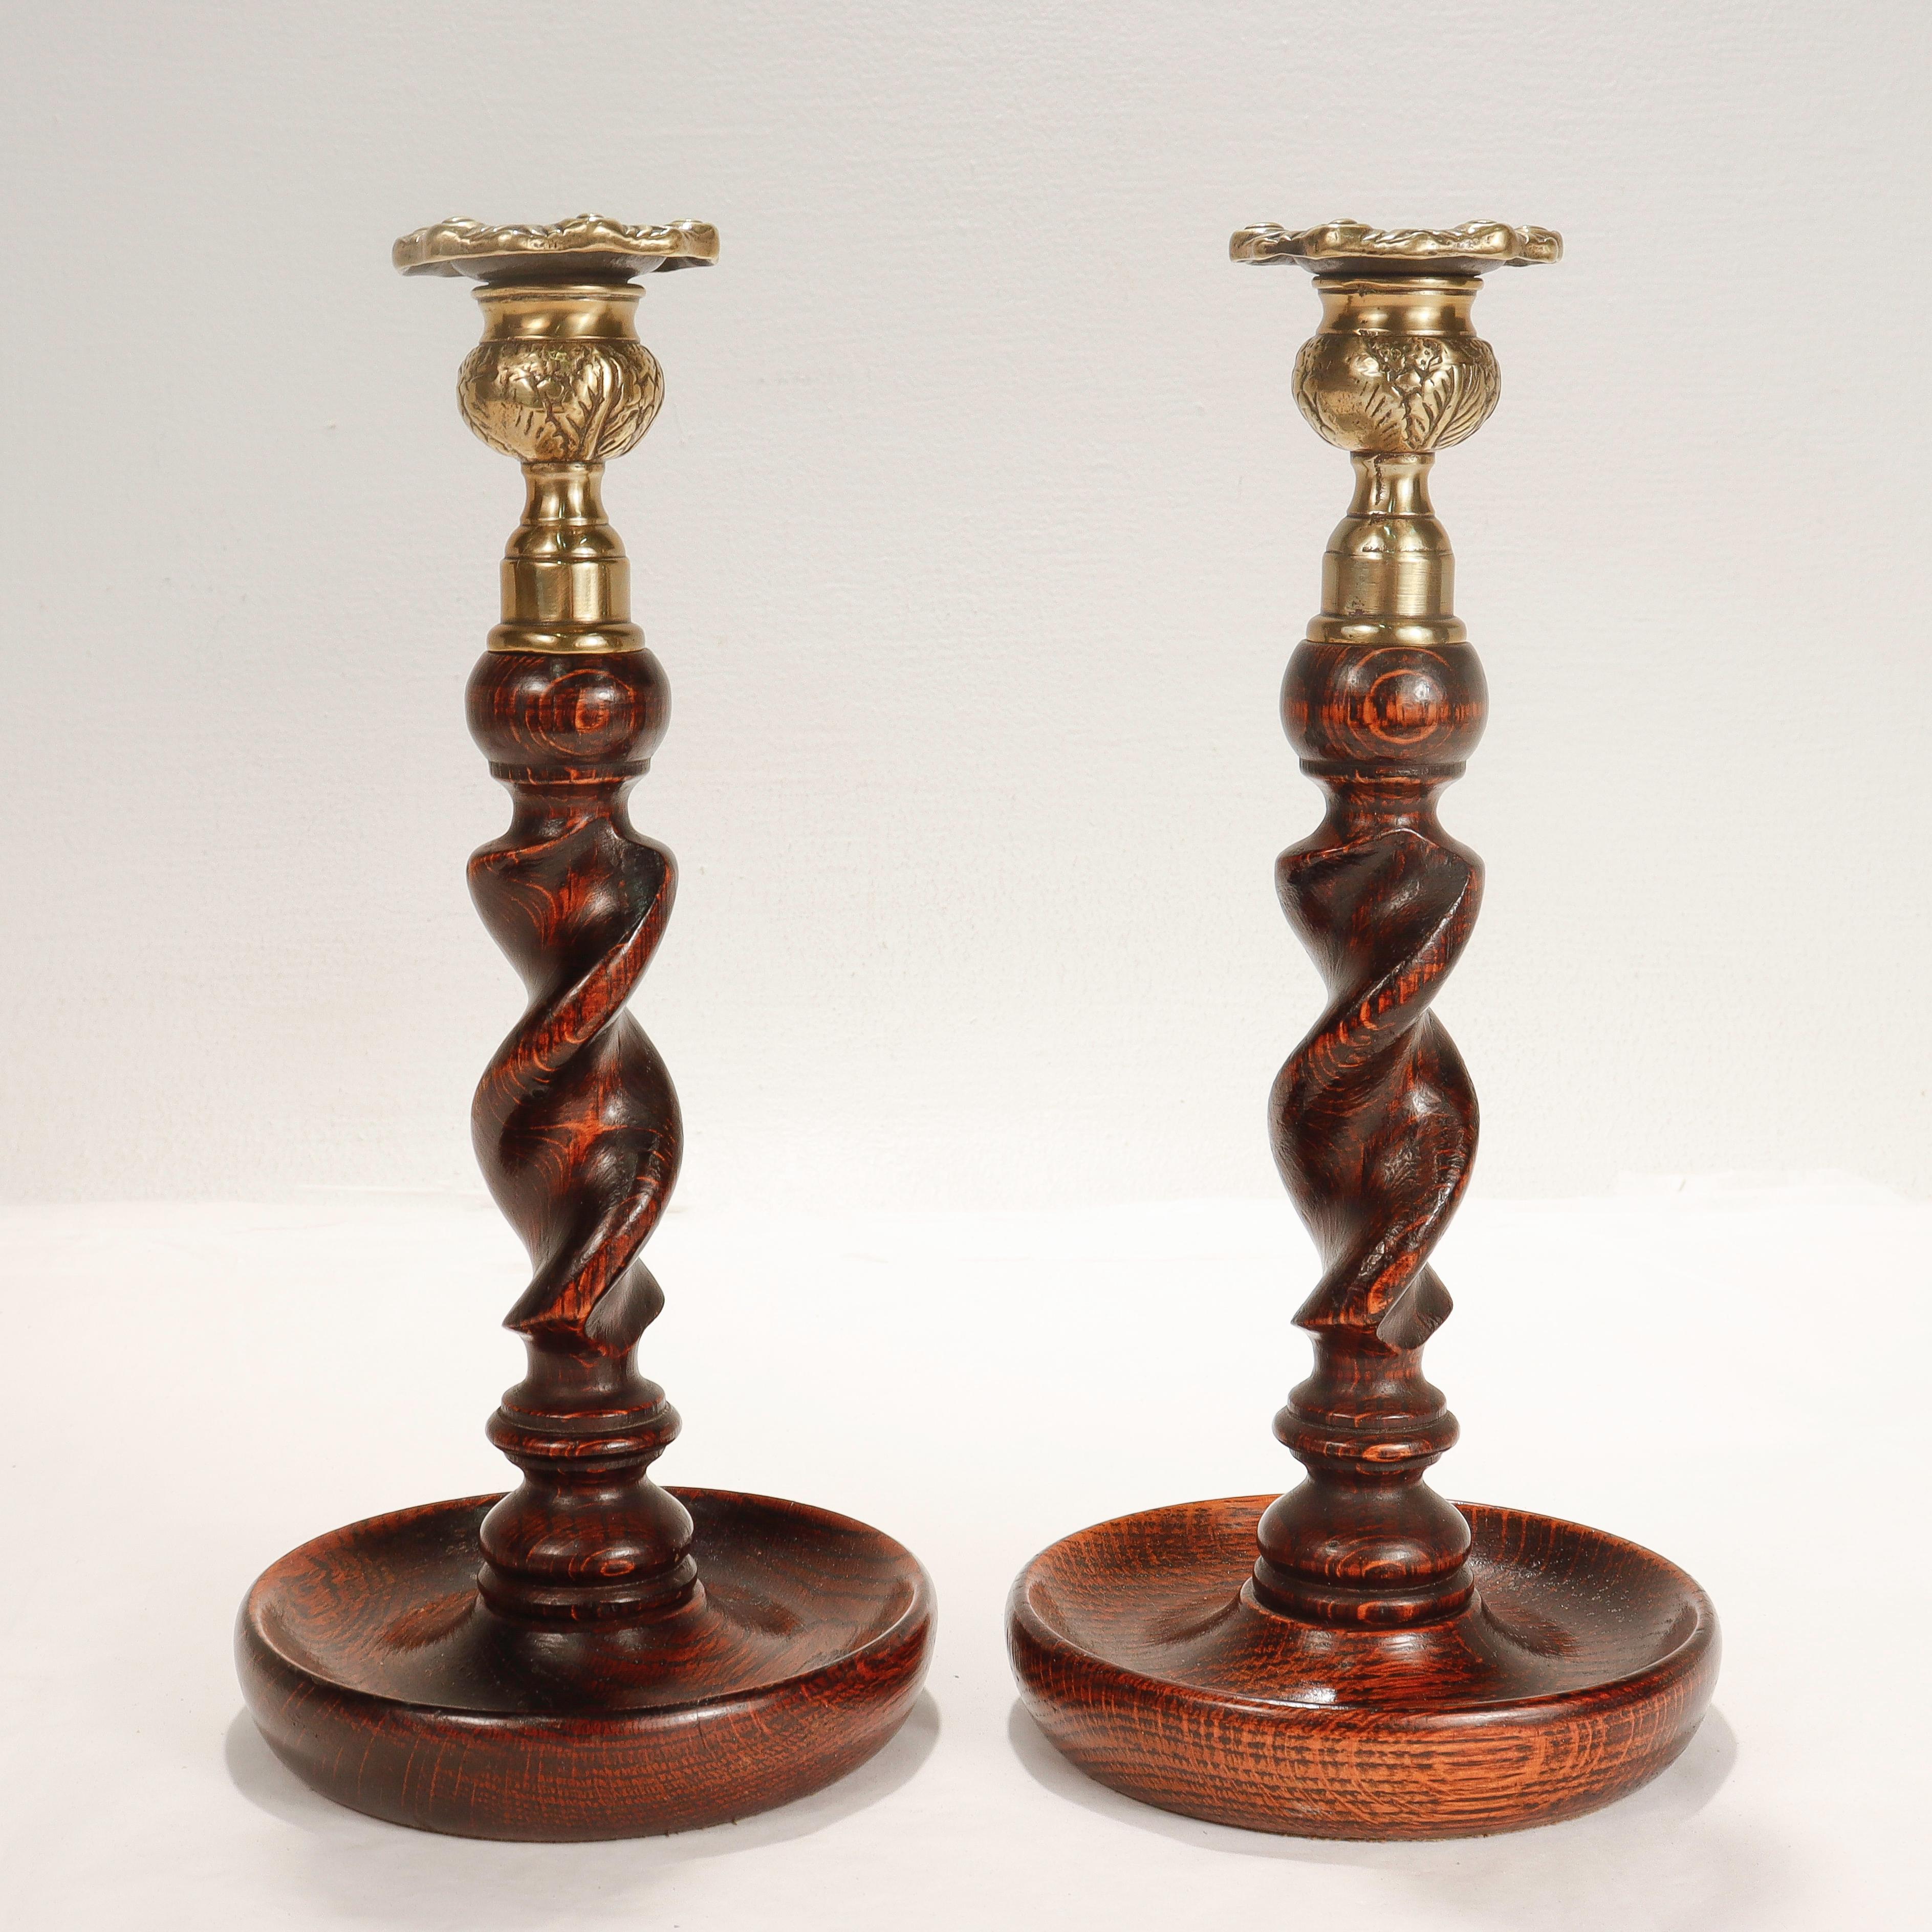 A fine pair of Jacobean style candlesticks.

In turned oak with upturned bases supporting barley twist shafts and cast brass candle cups & bobeches.

The bobeches are threaded and removable and the bases have aged green felt pads.

Simply a